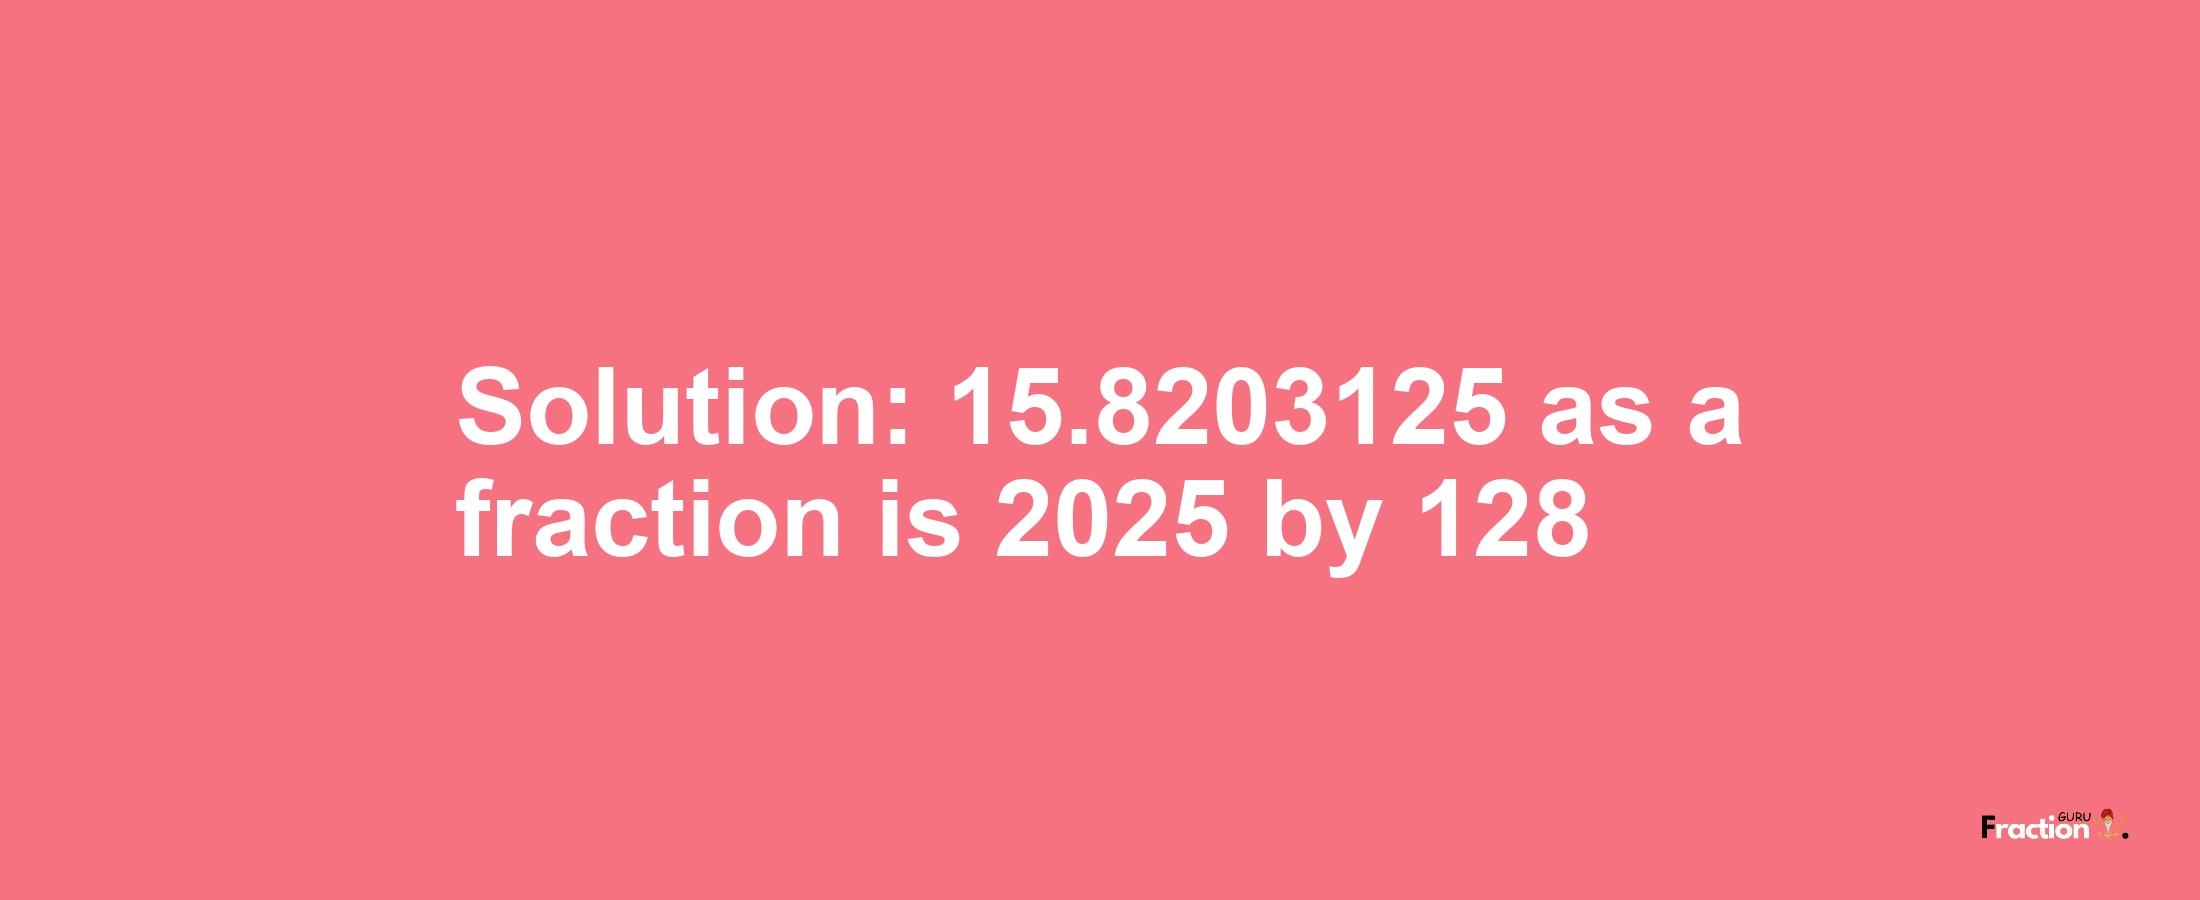 Solution:15.8203125 as a fraction is 2025/128